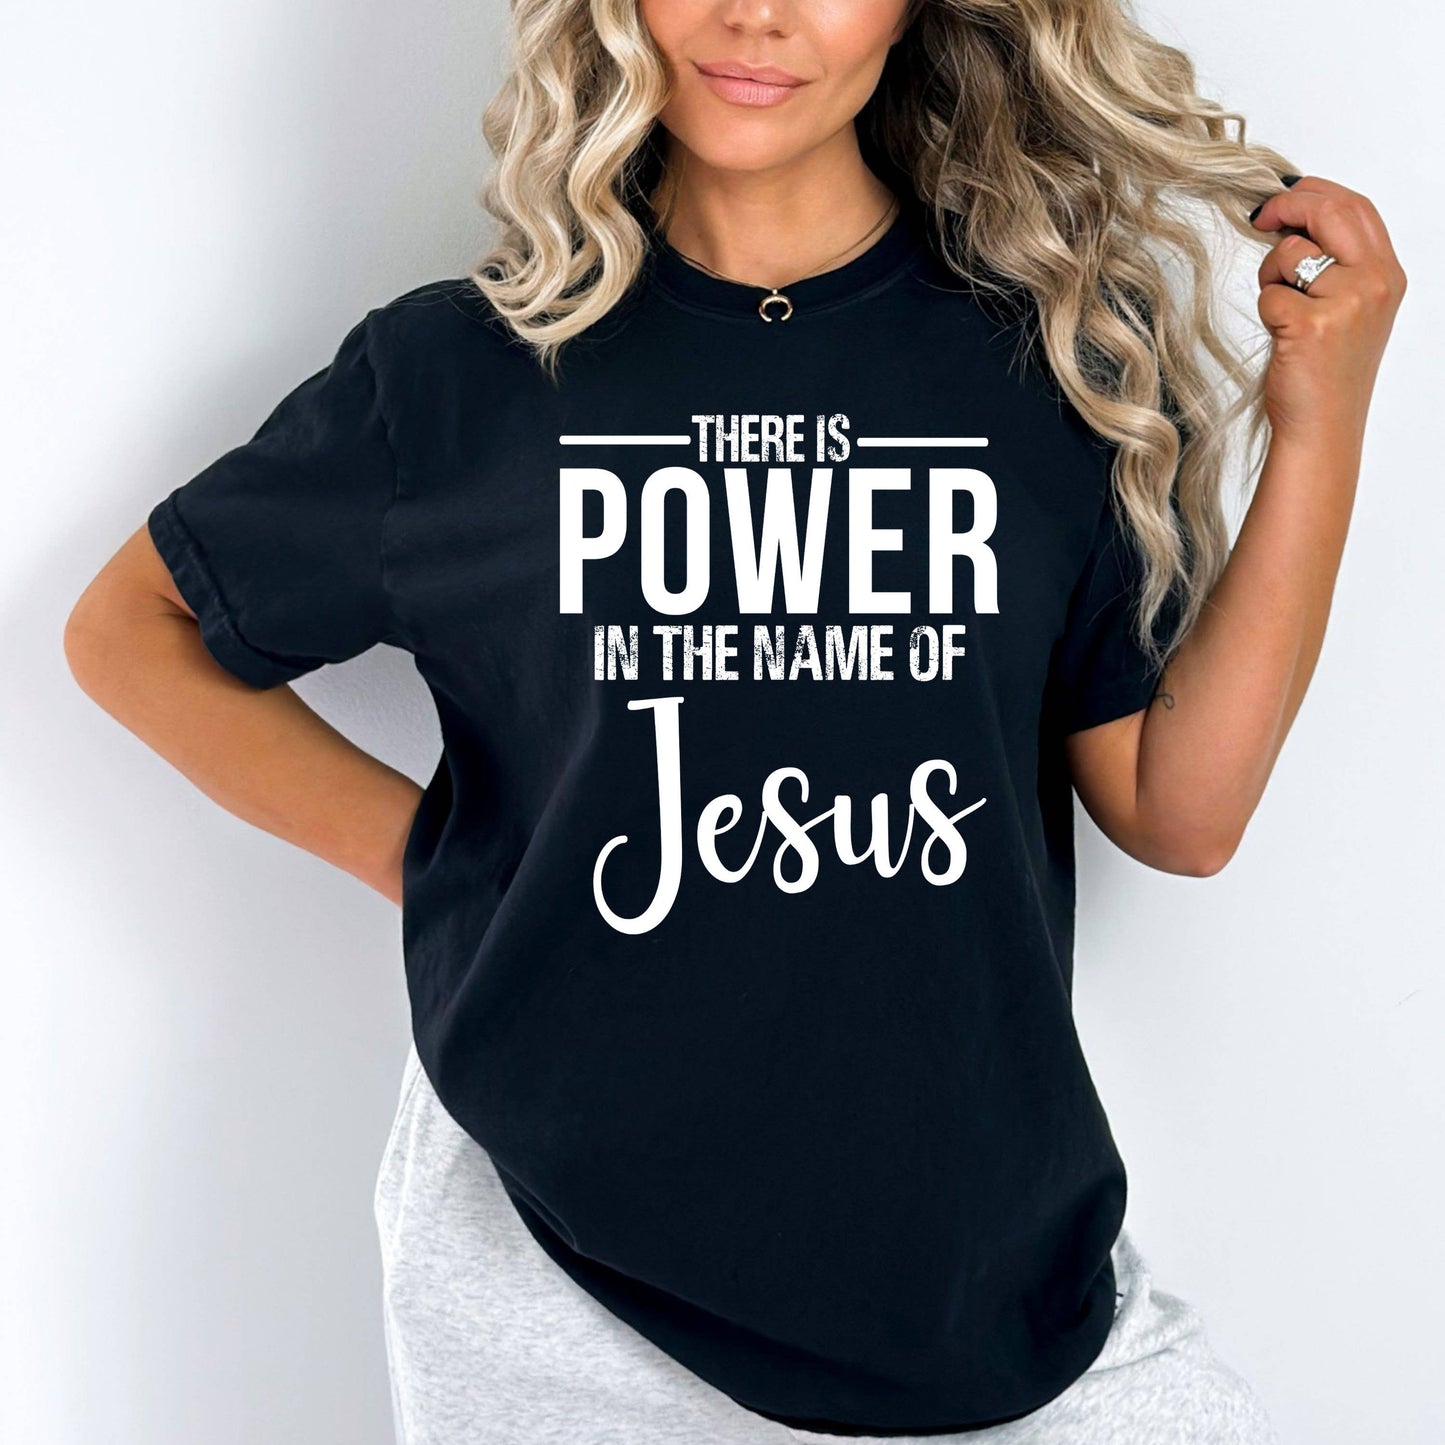 THERE IS POWER IN THE NAMES OF JESUS - Graphic Tee Shirt